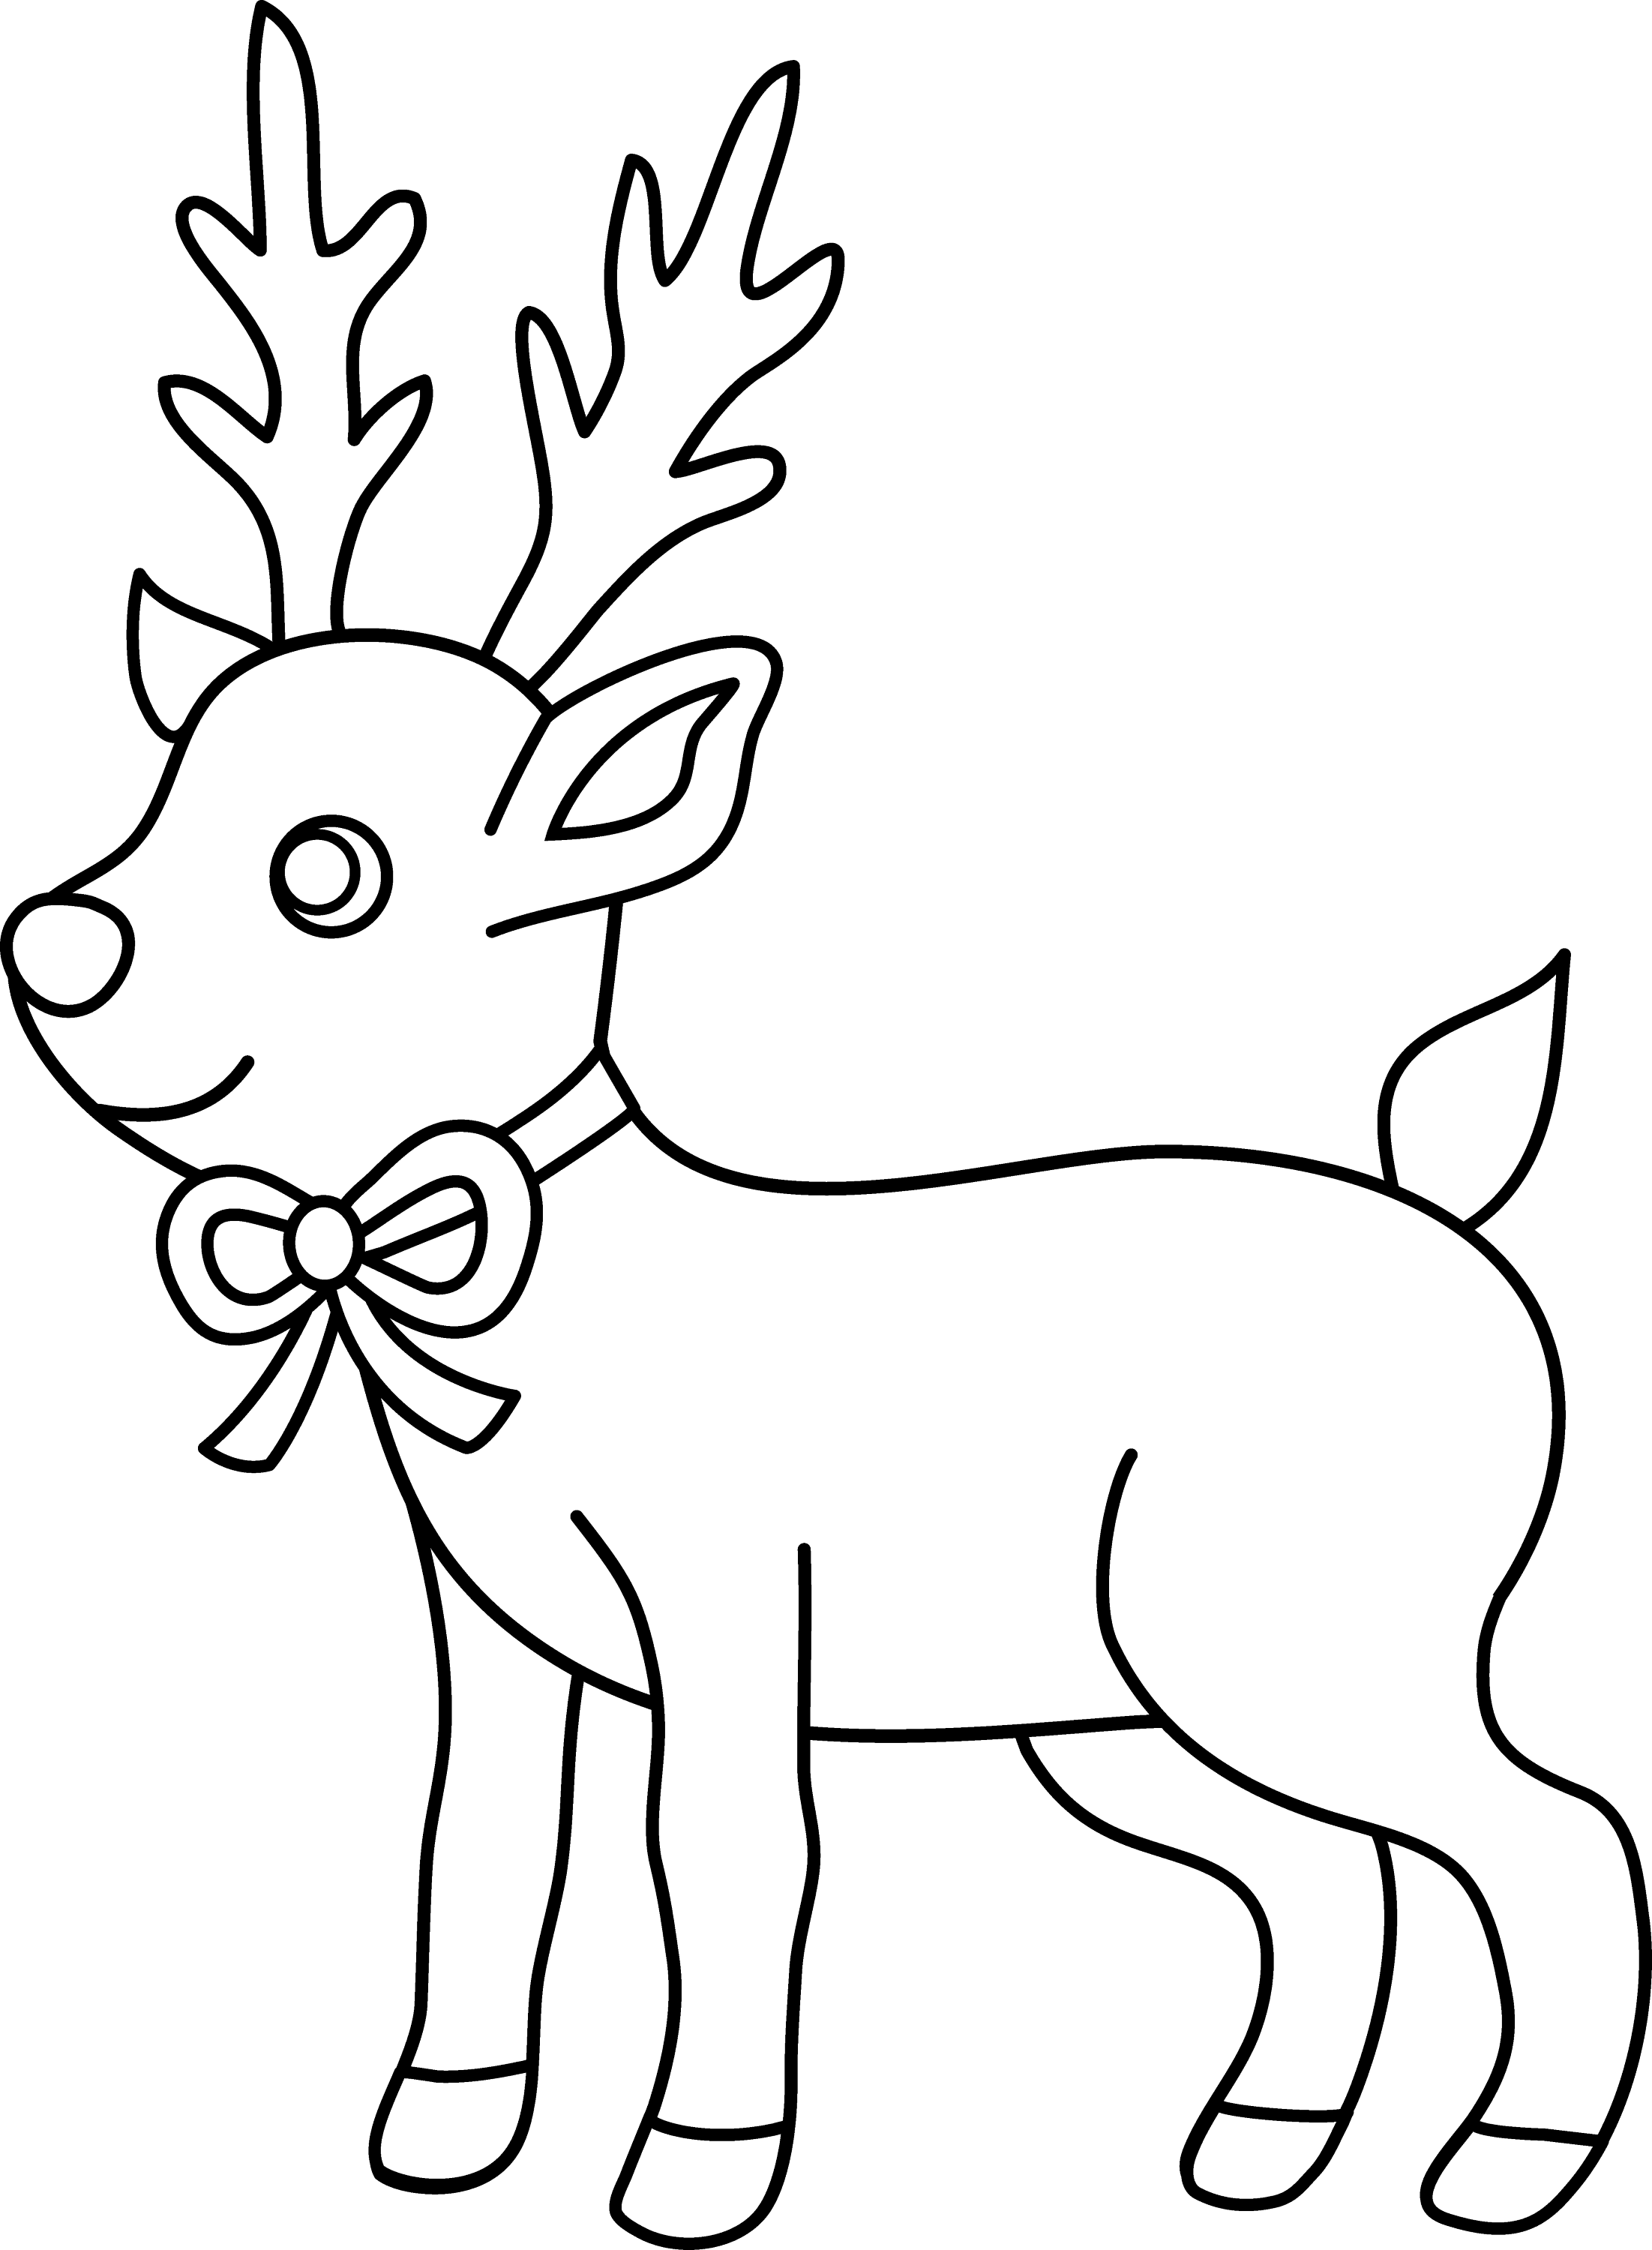 Christmas Reindeer Coloring Page Free Clip Art